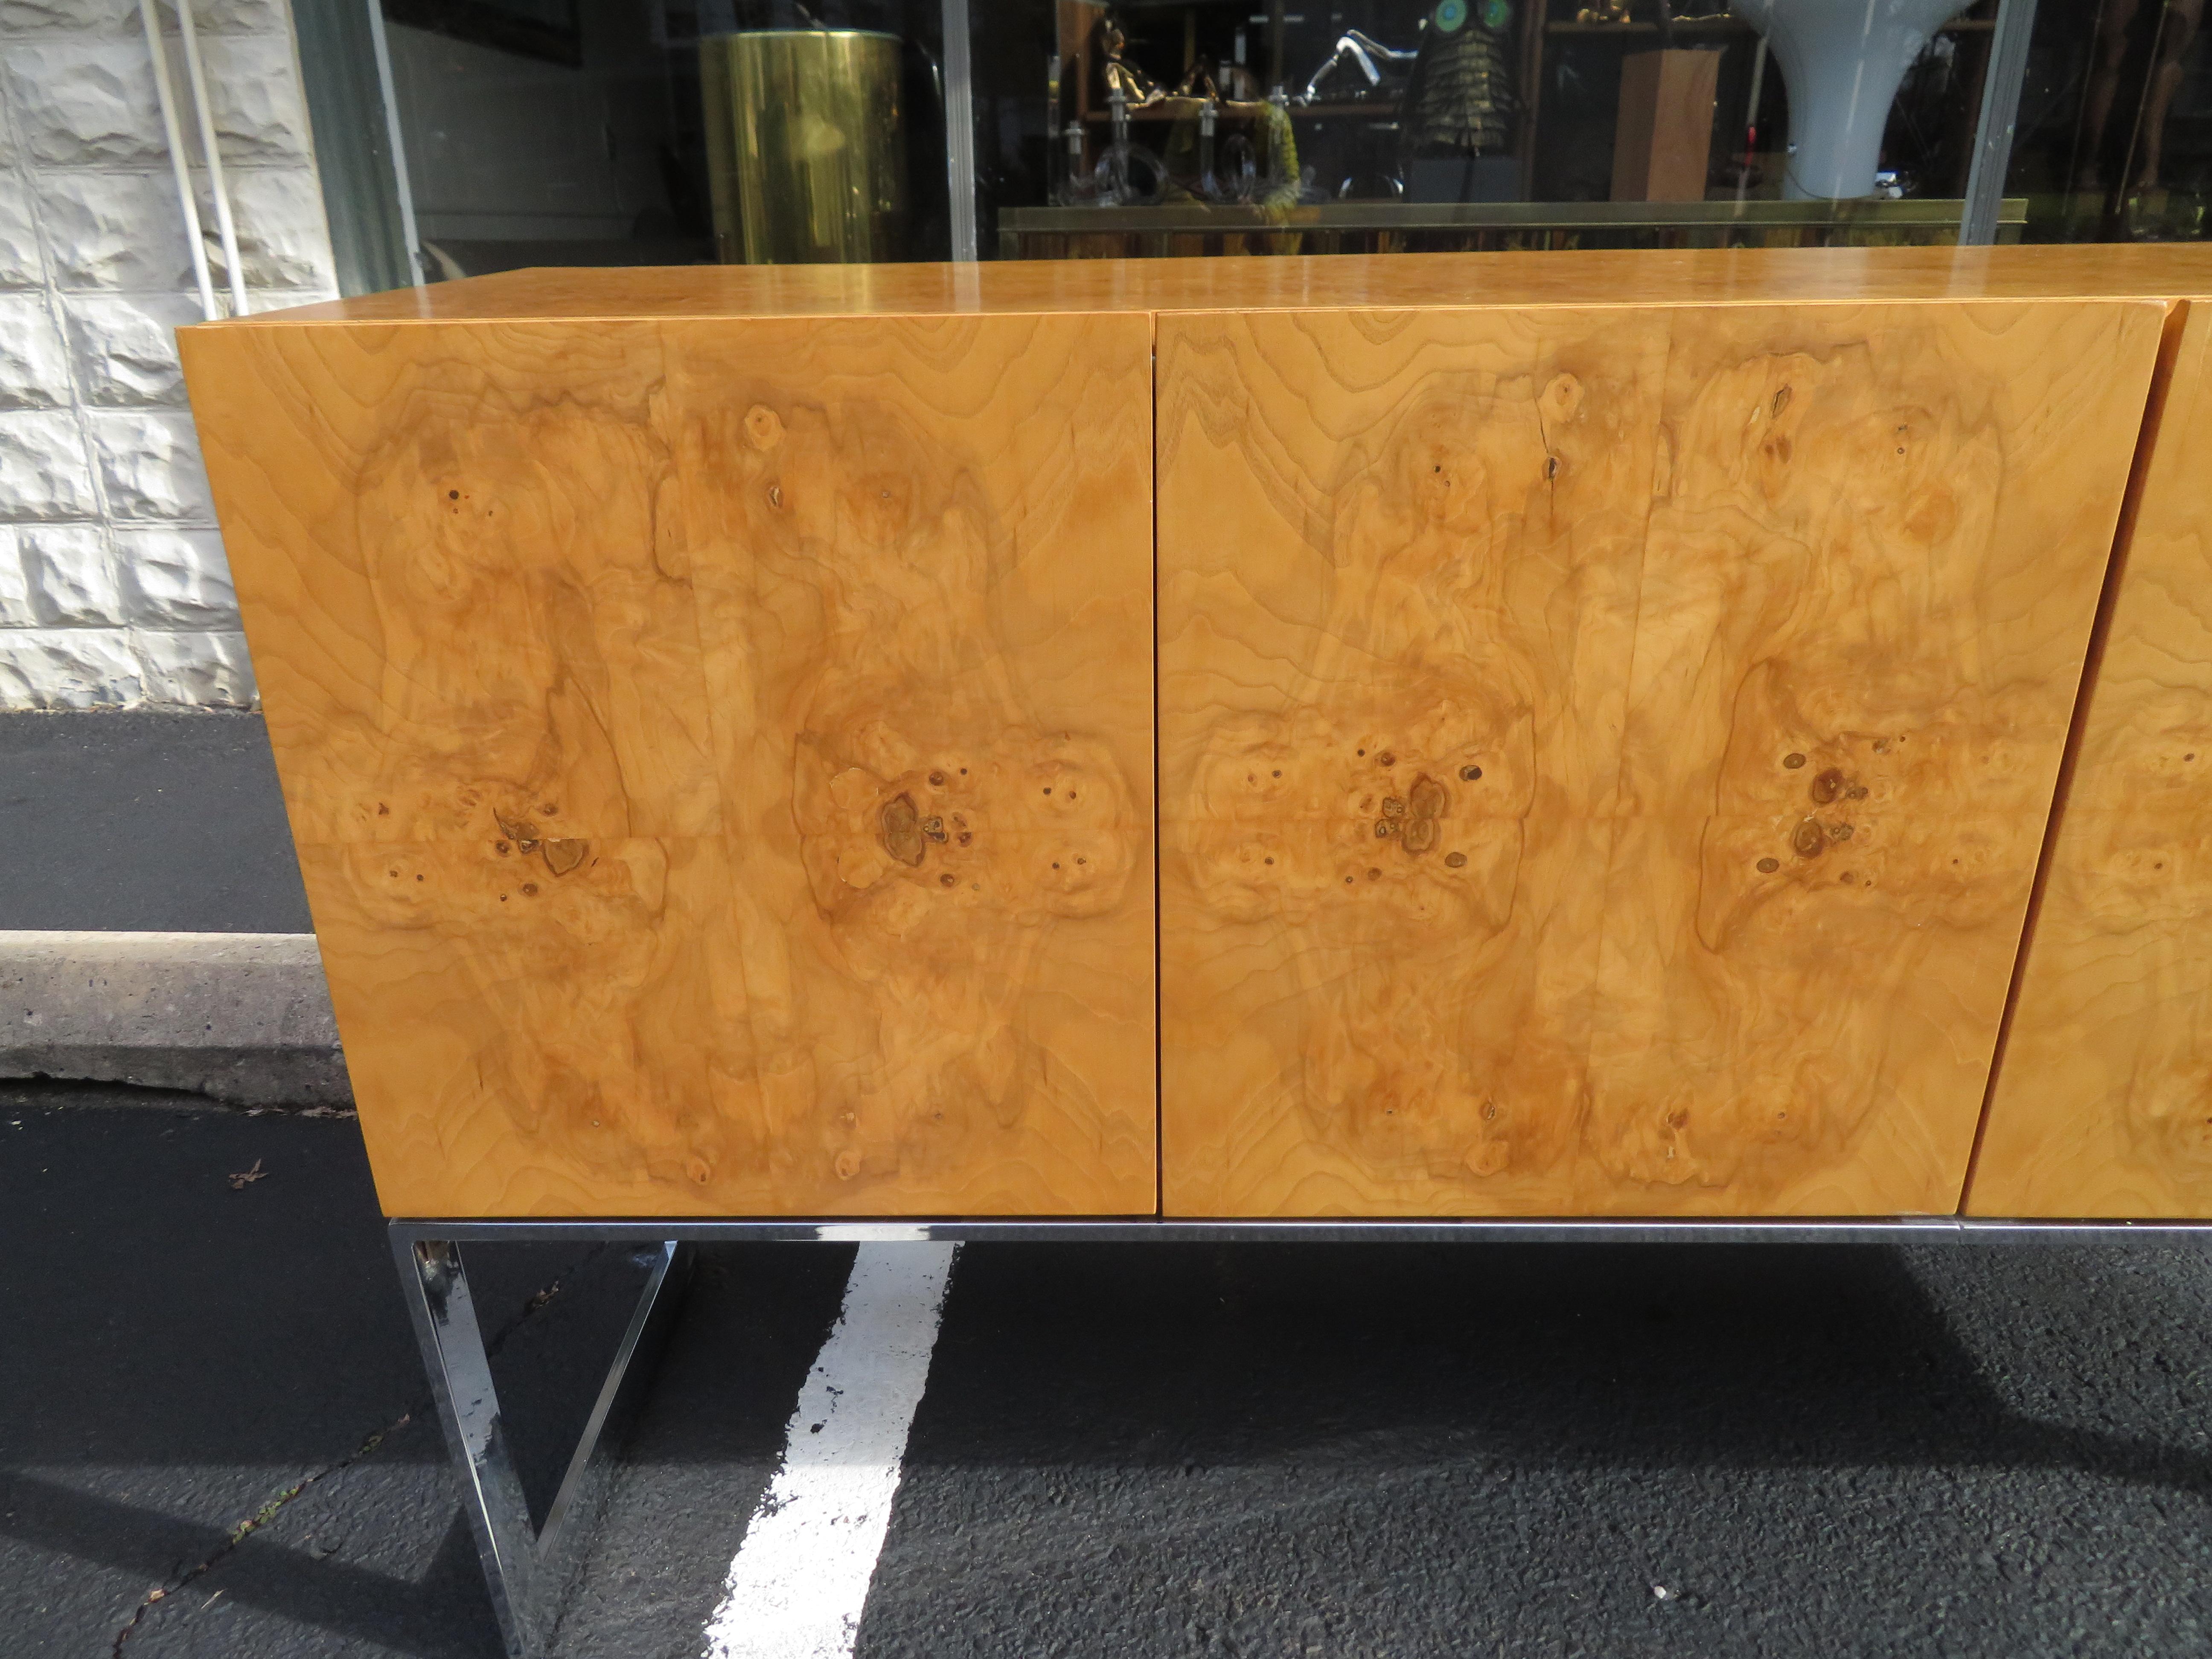 Magnificent Milo Baughman burled olive wood and chrome credenza. This particular piece is in very nice vintage condition, one of the nicest we have had in a long time. It does have the Milo Baughman label in the top drawer and the inside is clean!